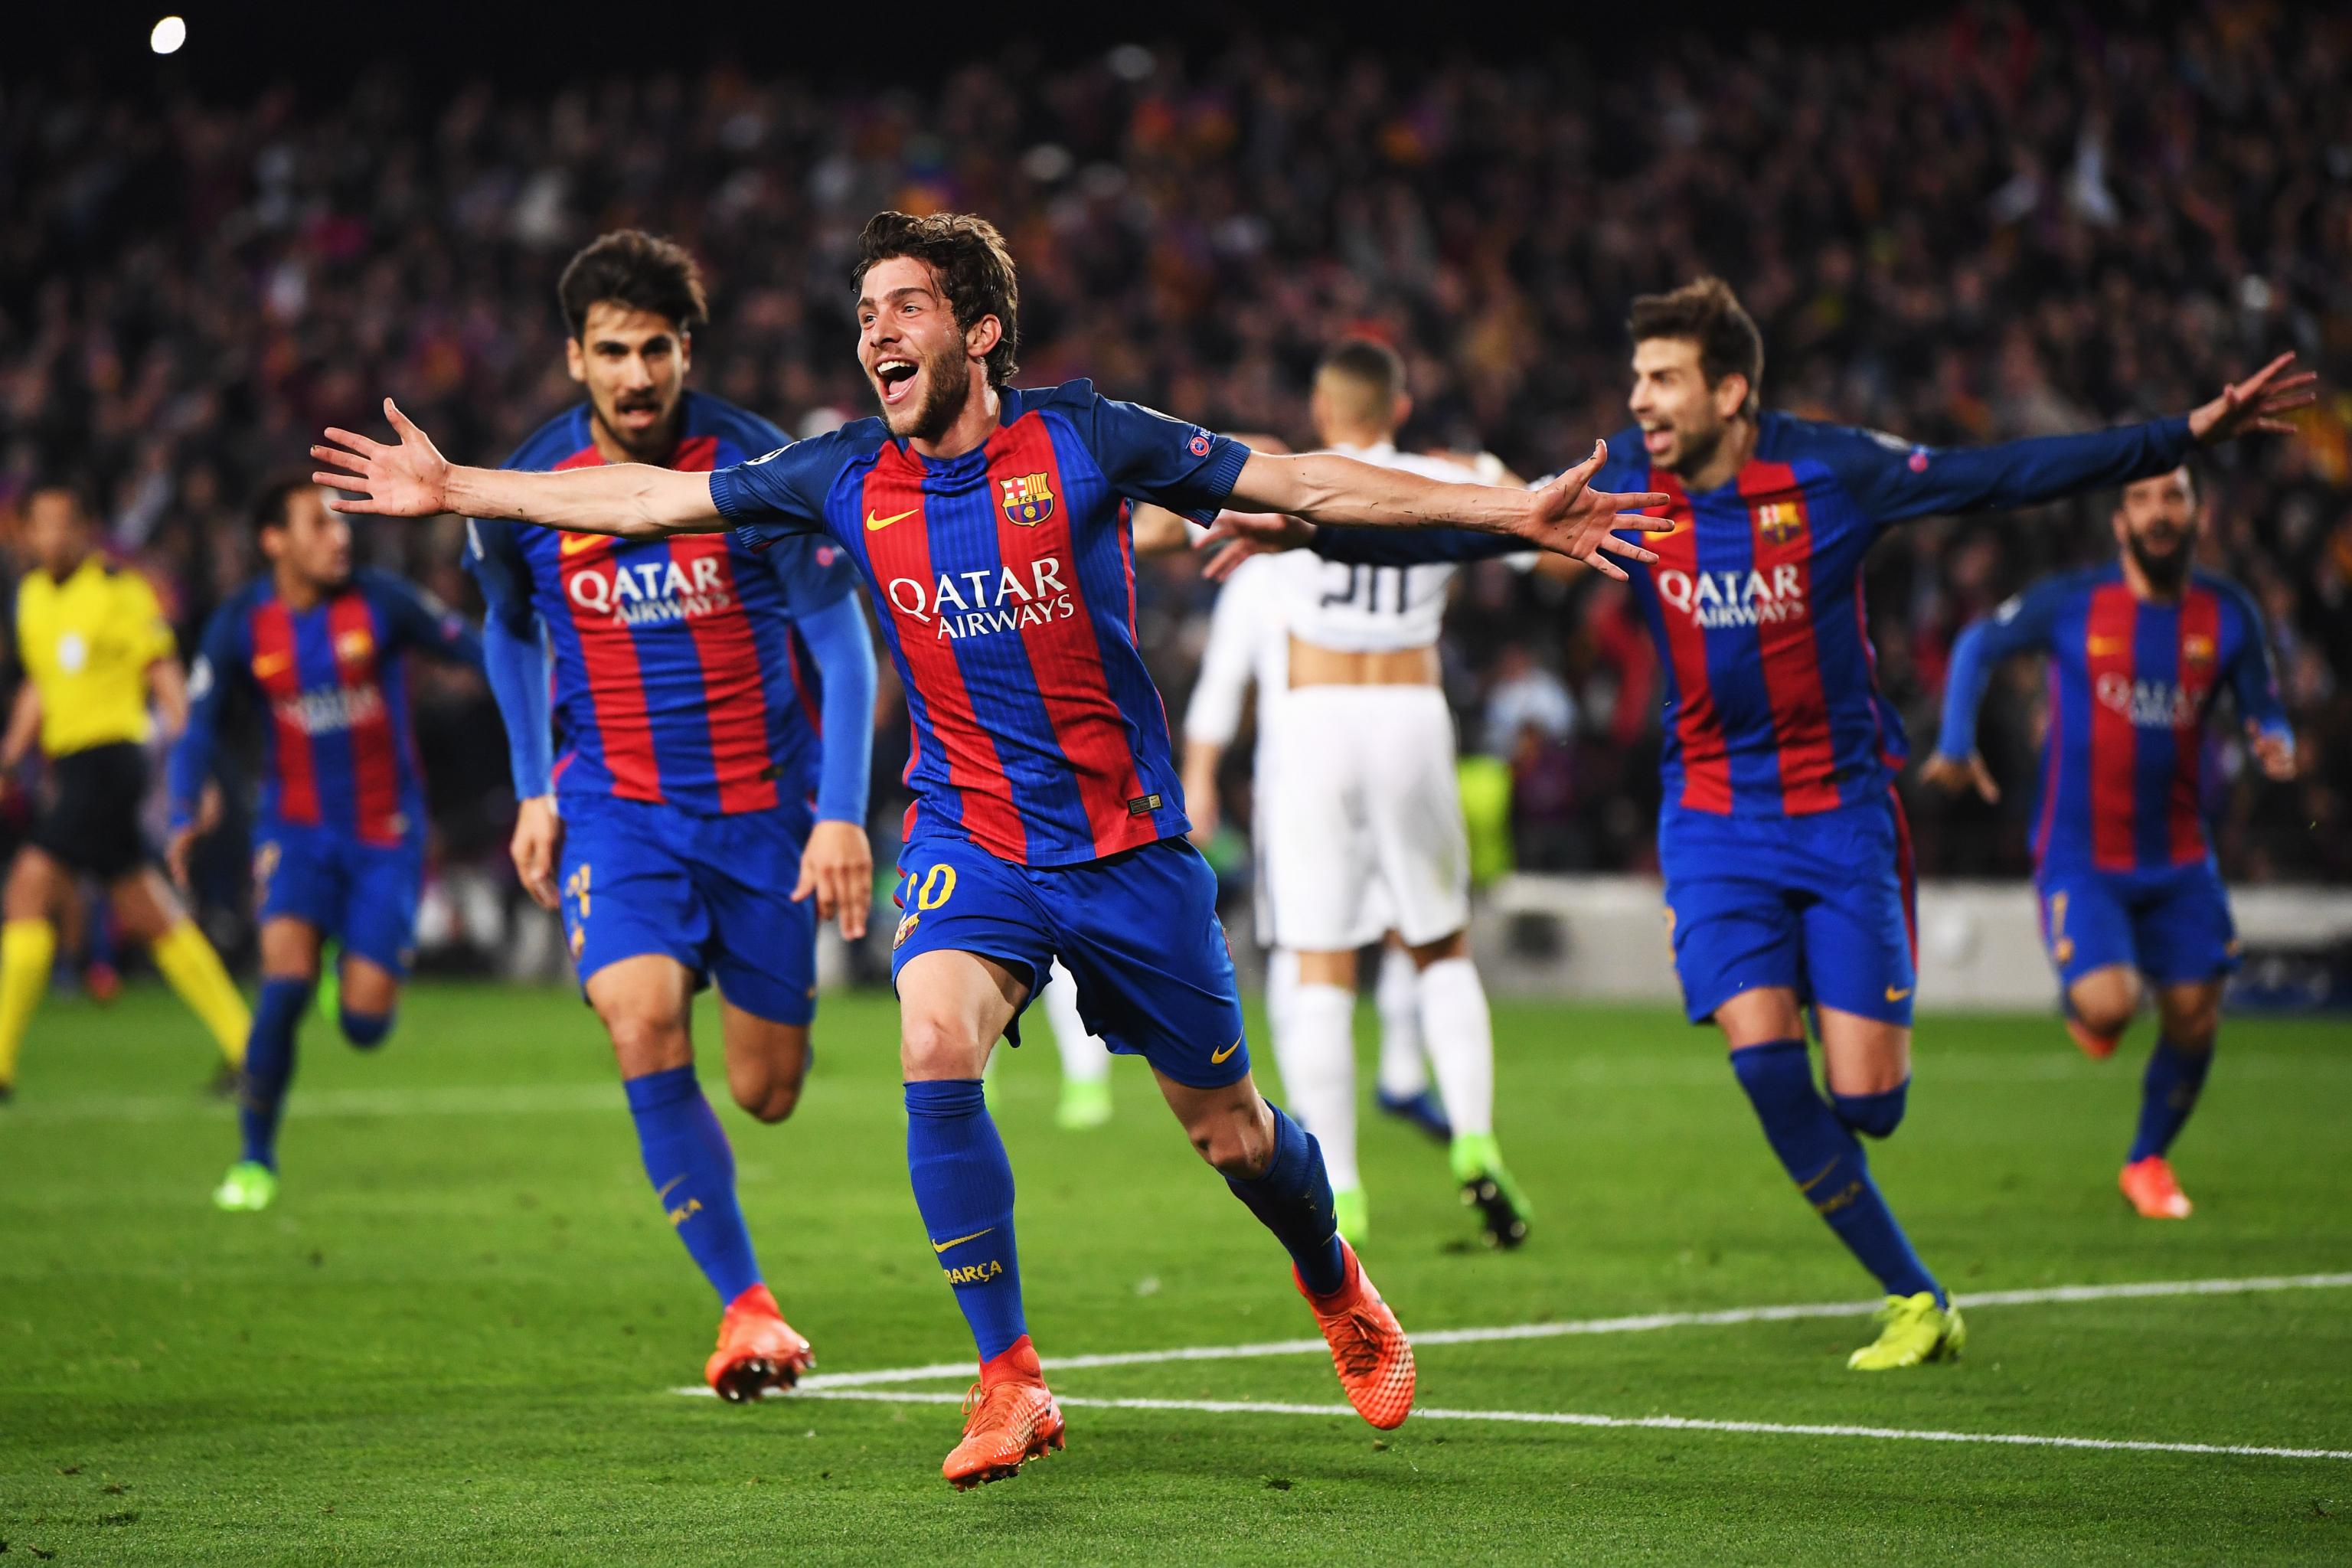 Barcelona Vs Psg Score And Reaction From 17 Champions League Round Of 16 Bleacher Report Latest News Videos And Highlights